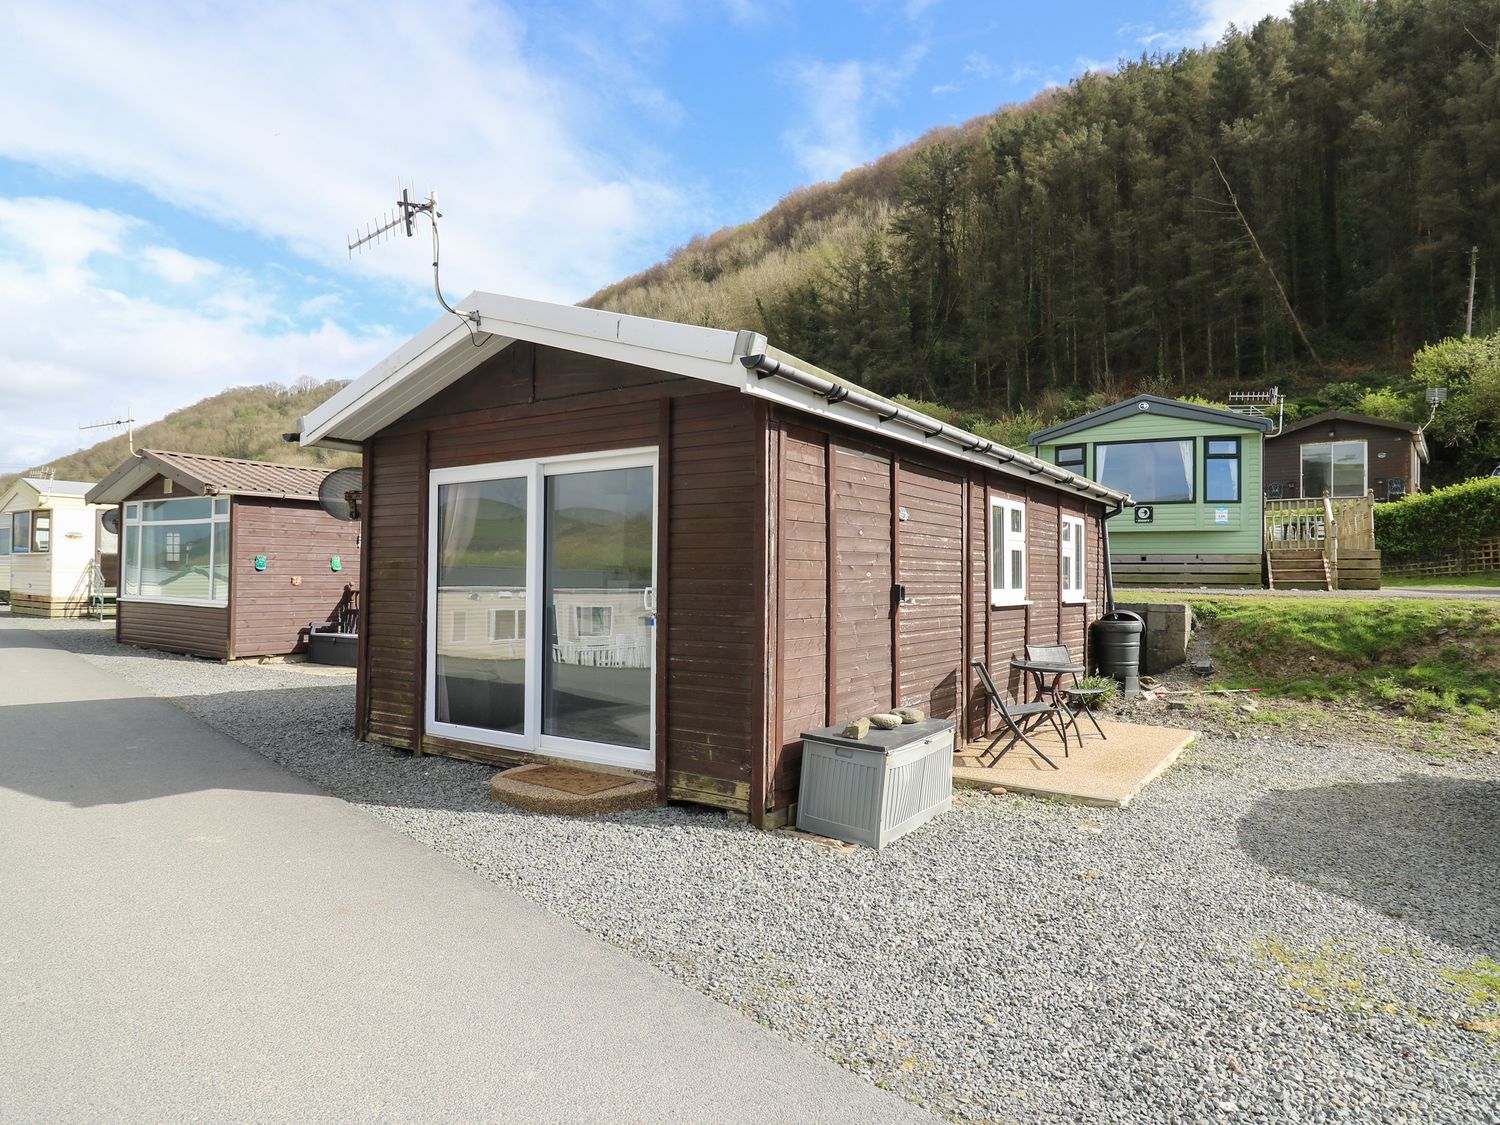 Chalet 151 - Mid Wales - 1154849 - photo 1